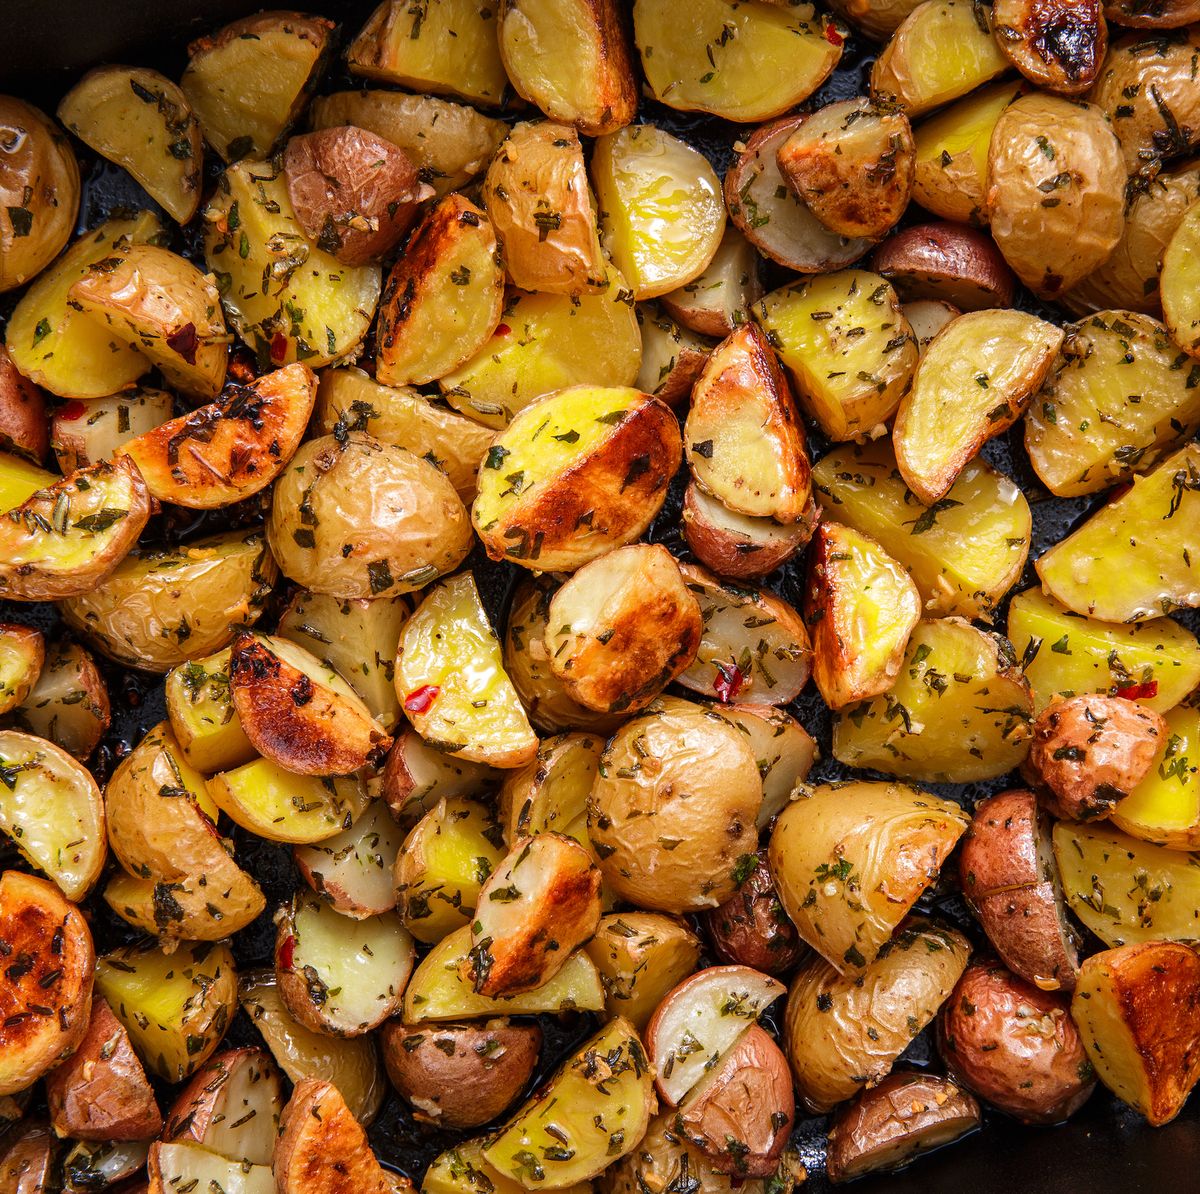 https://hips.hearstapps.com/hmg-prod/images/delish-roasted-potatoes-vertical-1-1540492242.jpg?crop=0.670xw:1.00xh;0.143xw,0&resize=1200:*